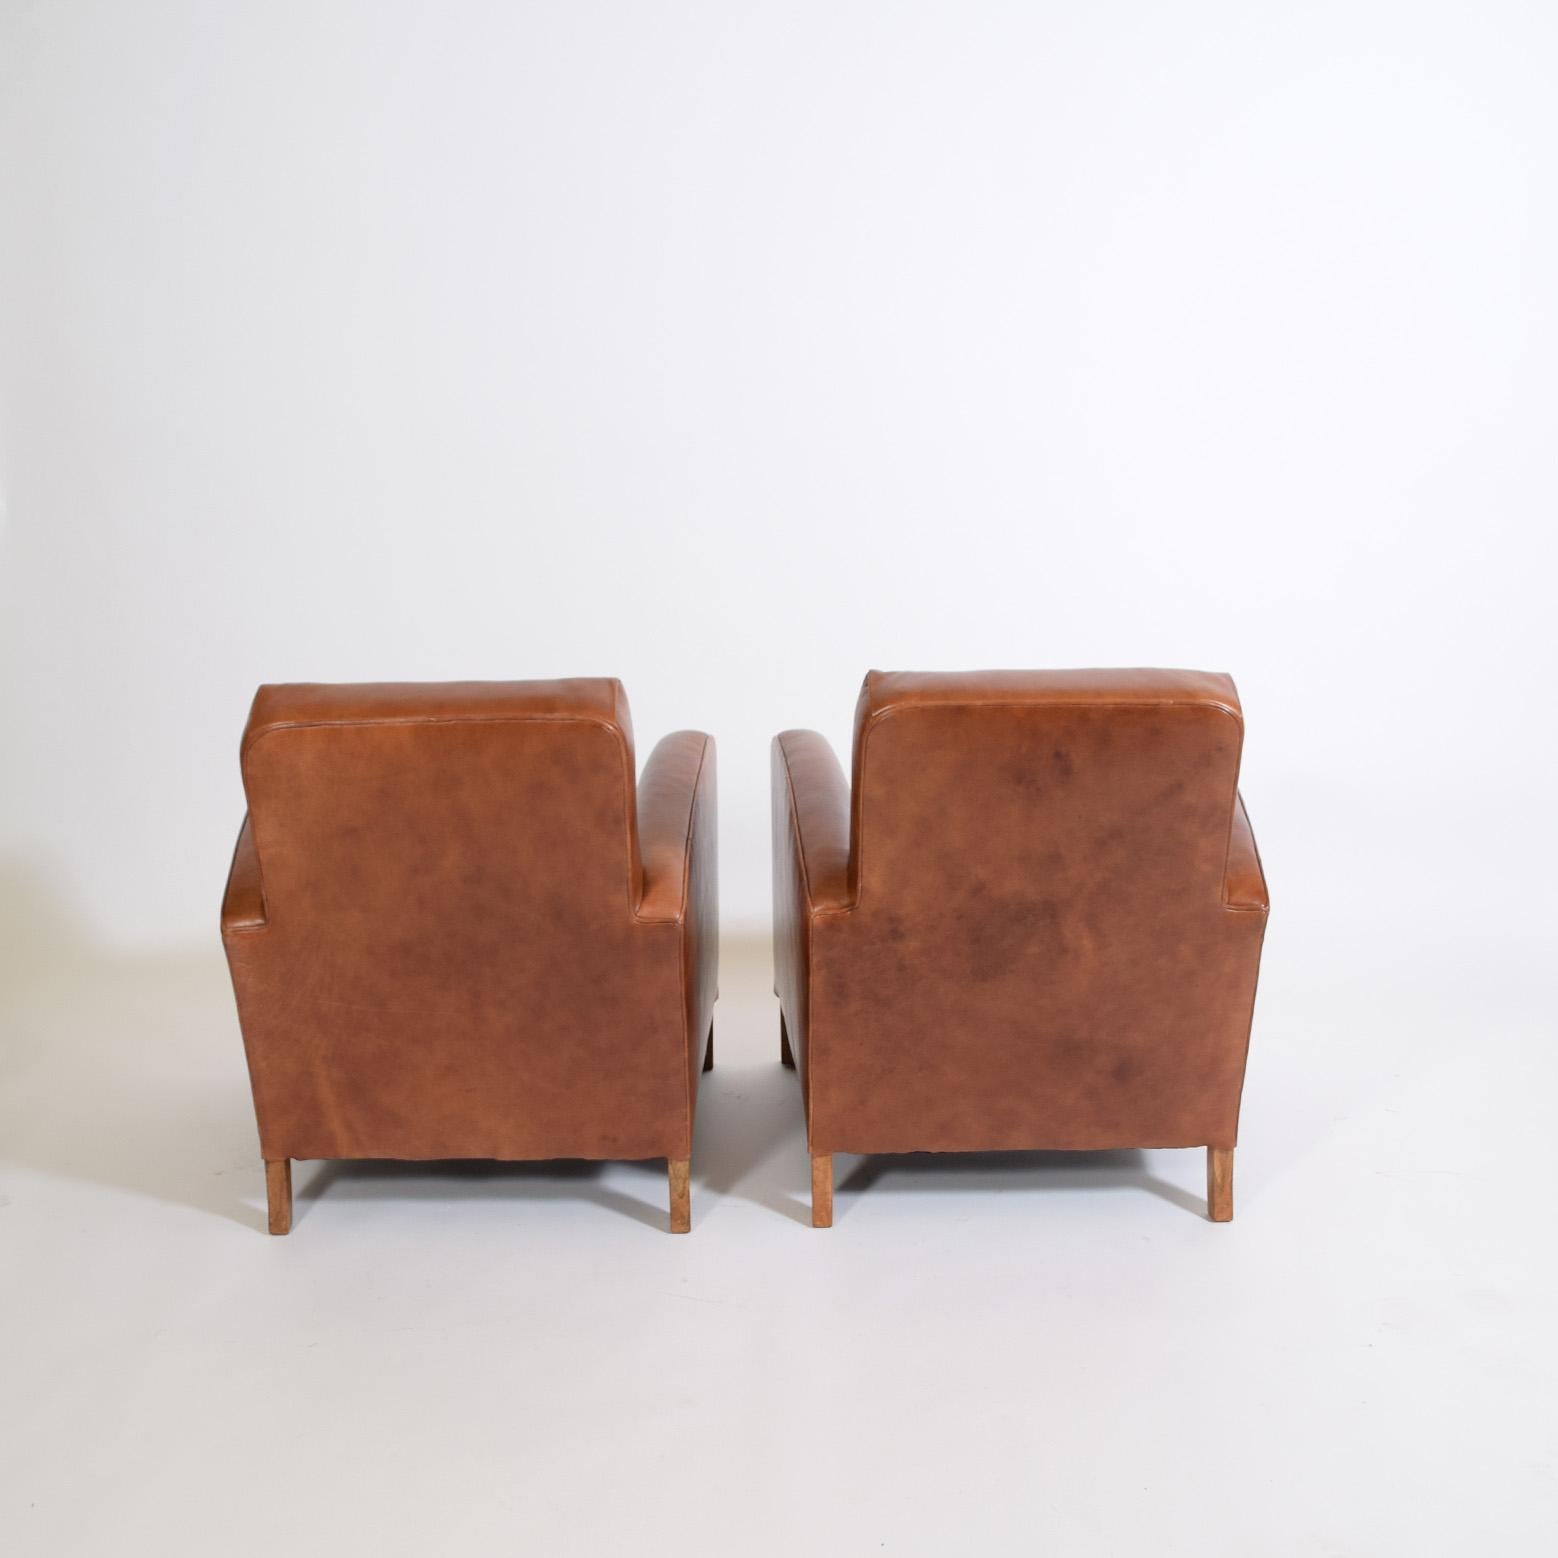 Leather Danish Art Deco Lounge Chairs 1930's For Sale